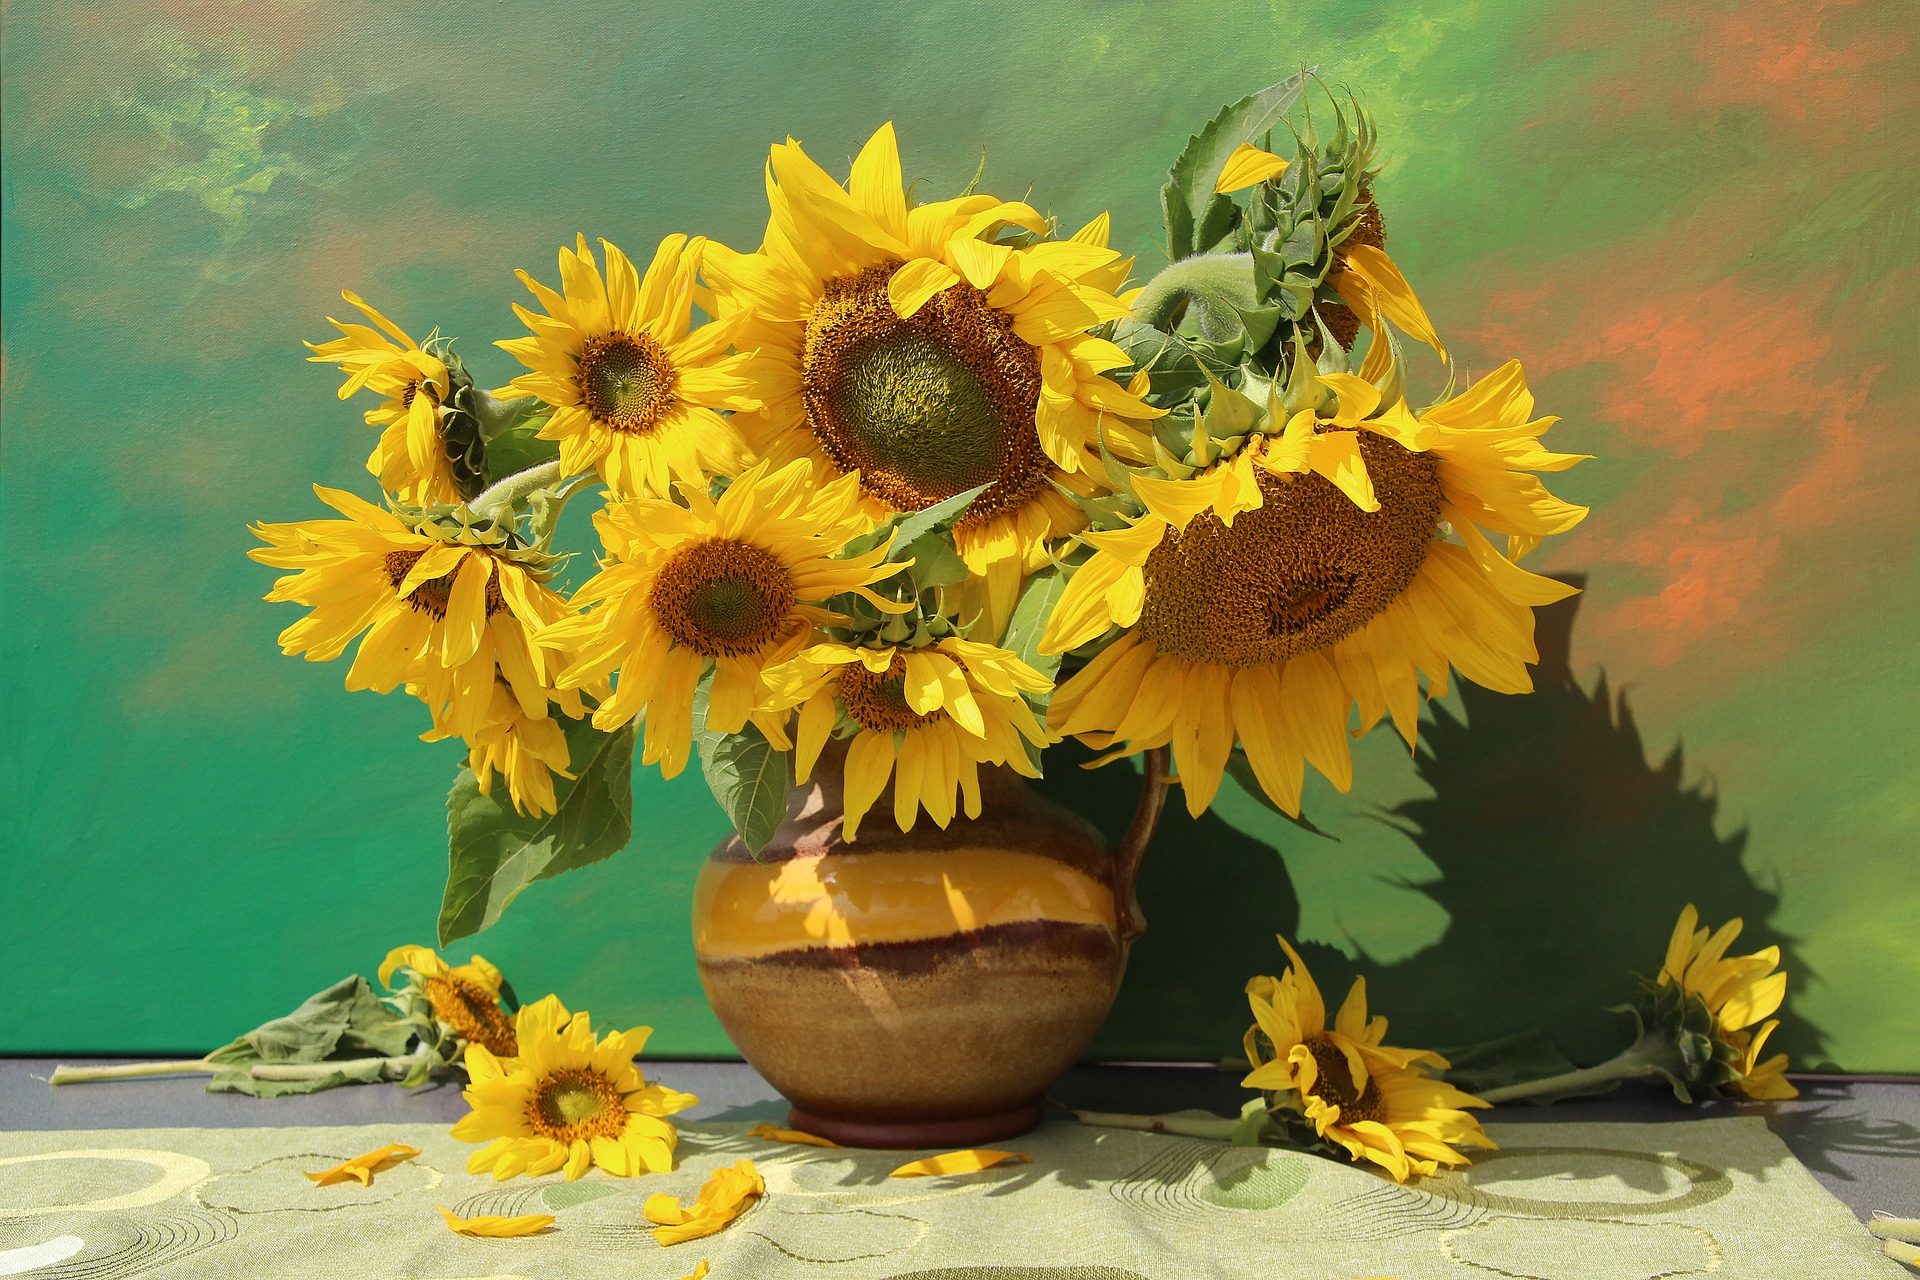 40 Sunflower Wallpapers For Hd Image - Sunflower Still Life Paintings , HD Wallpaper & Backgrounds